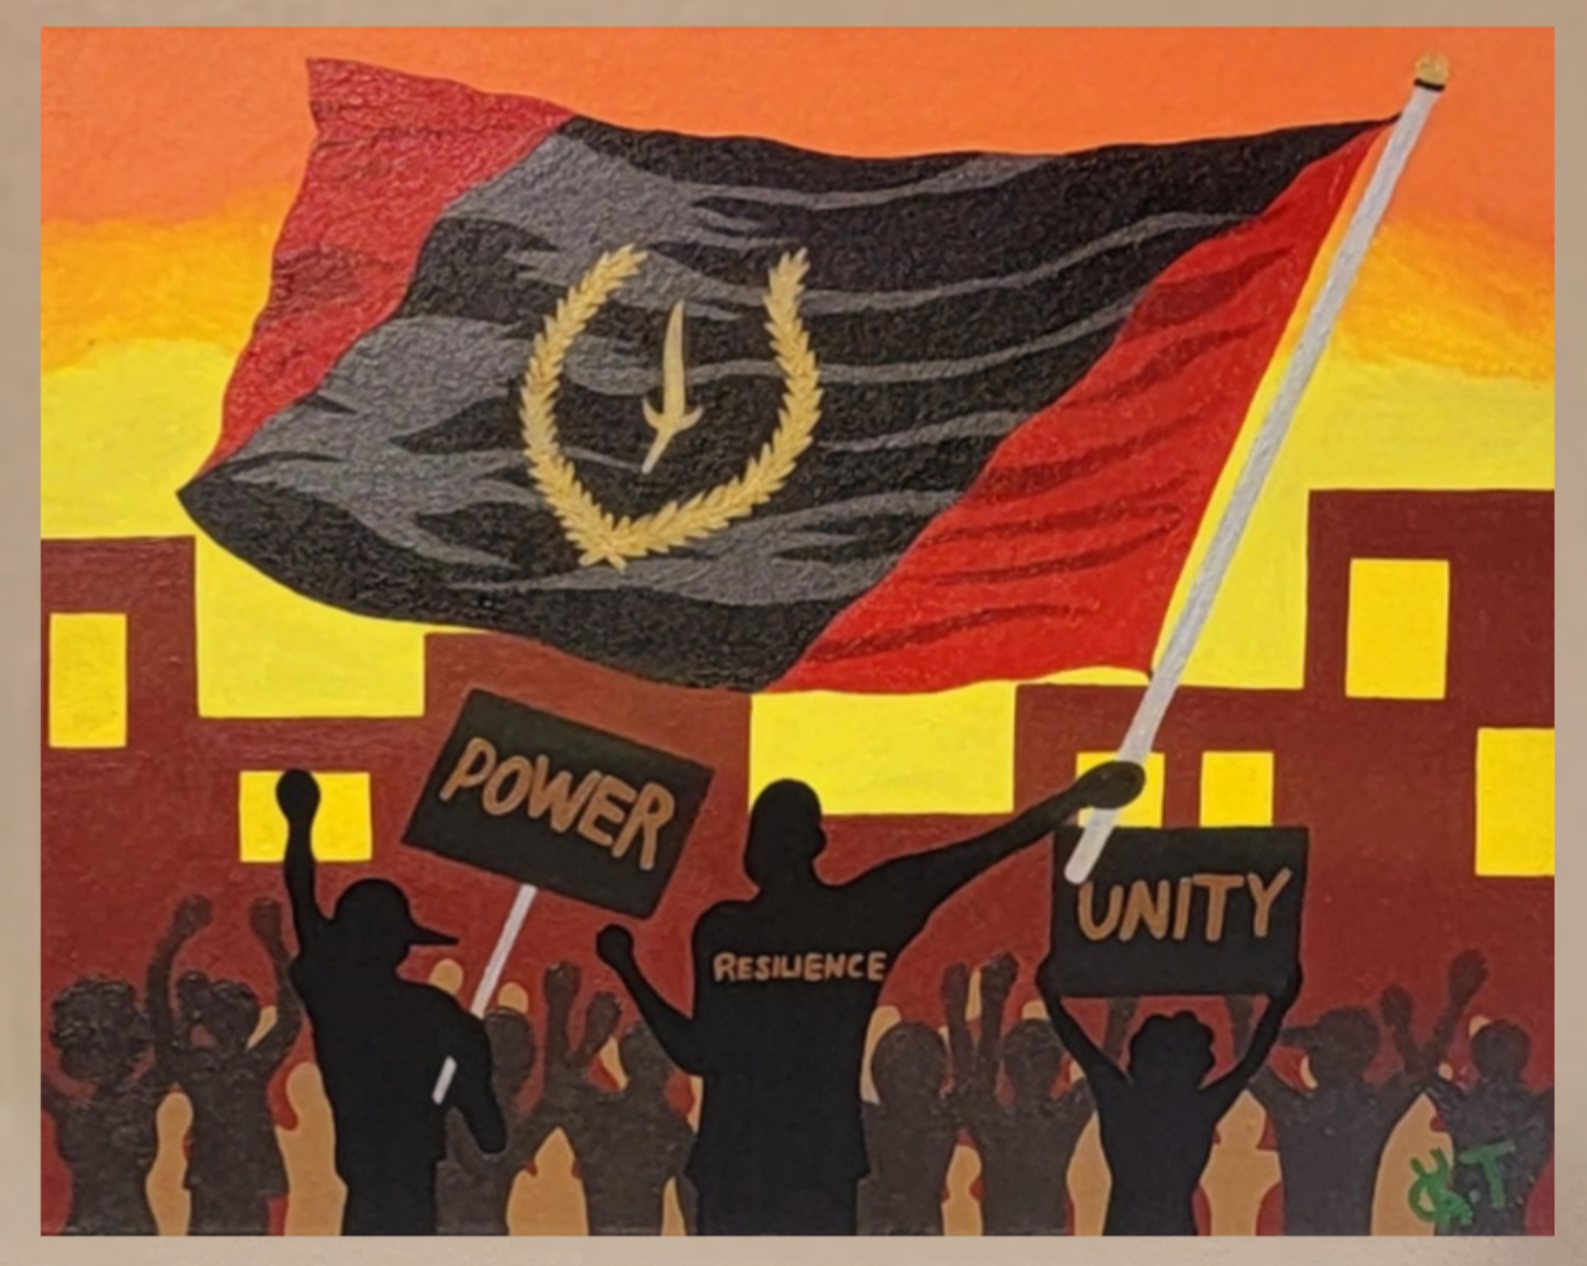 Painting of a protest